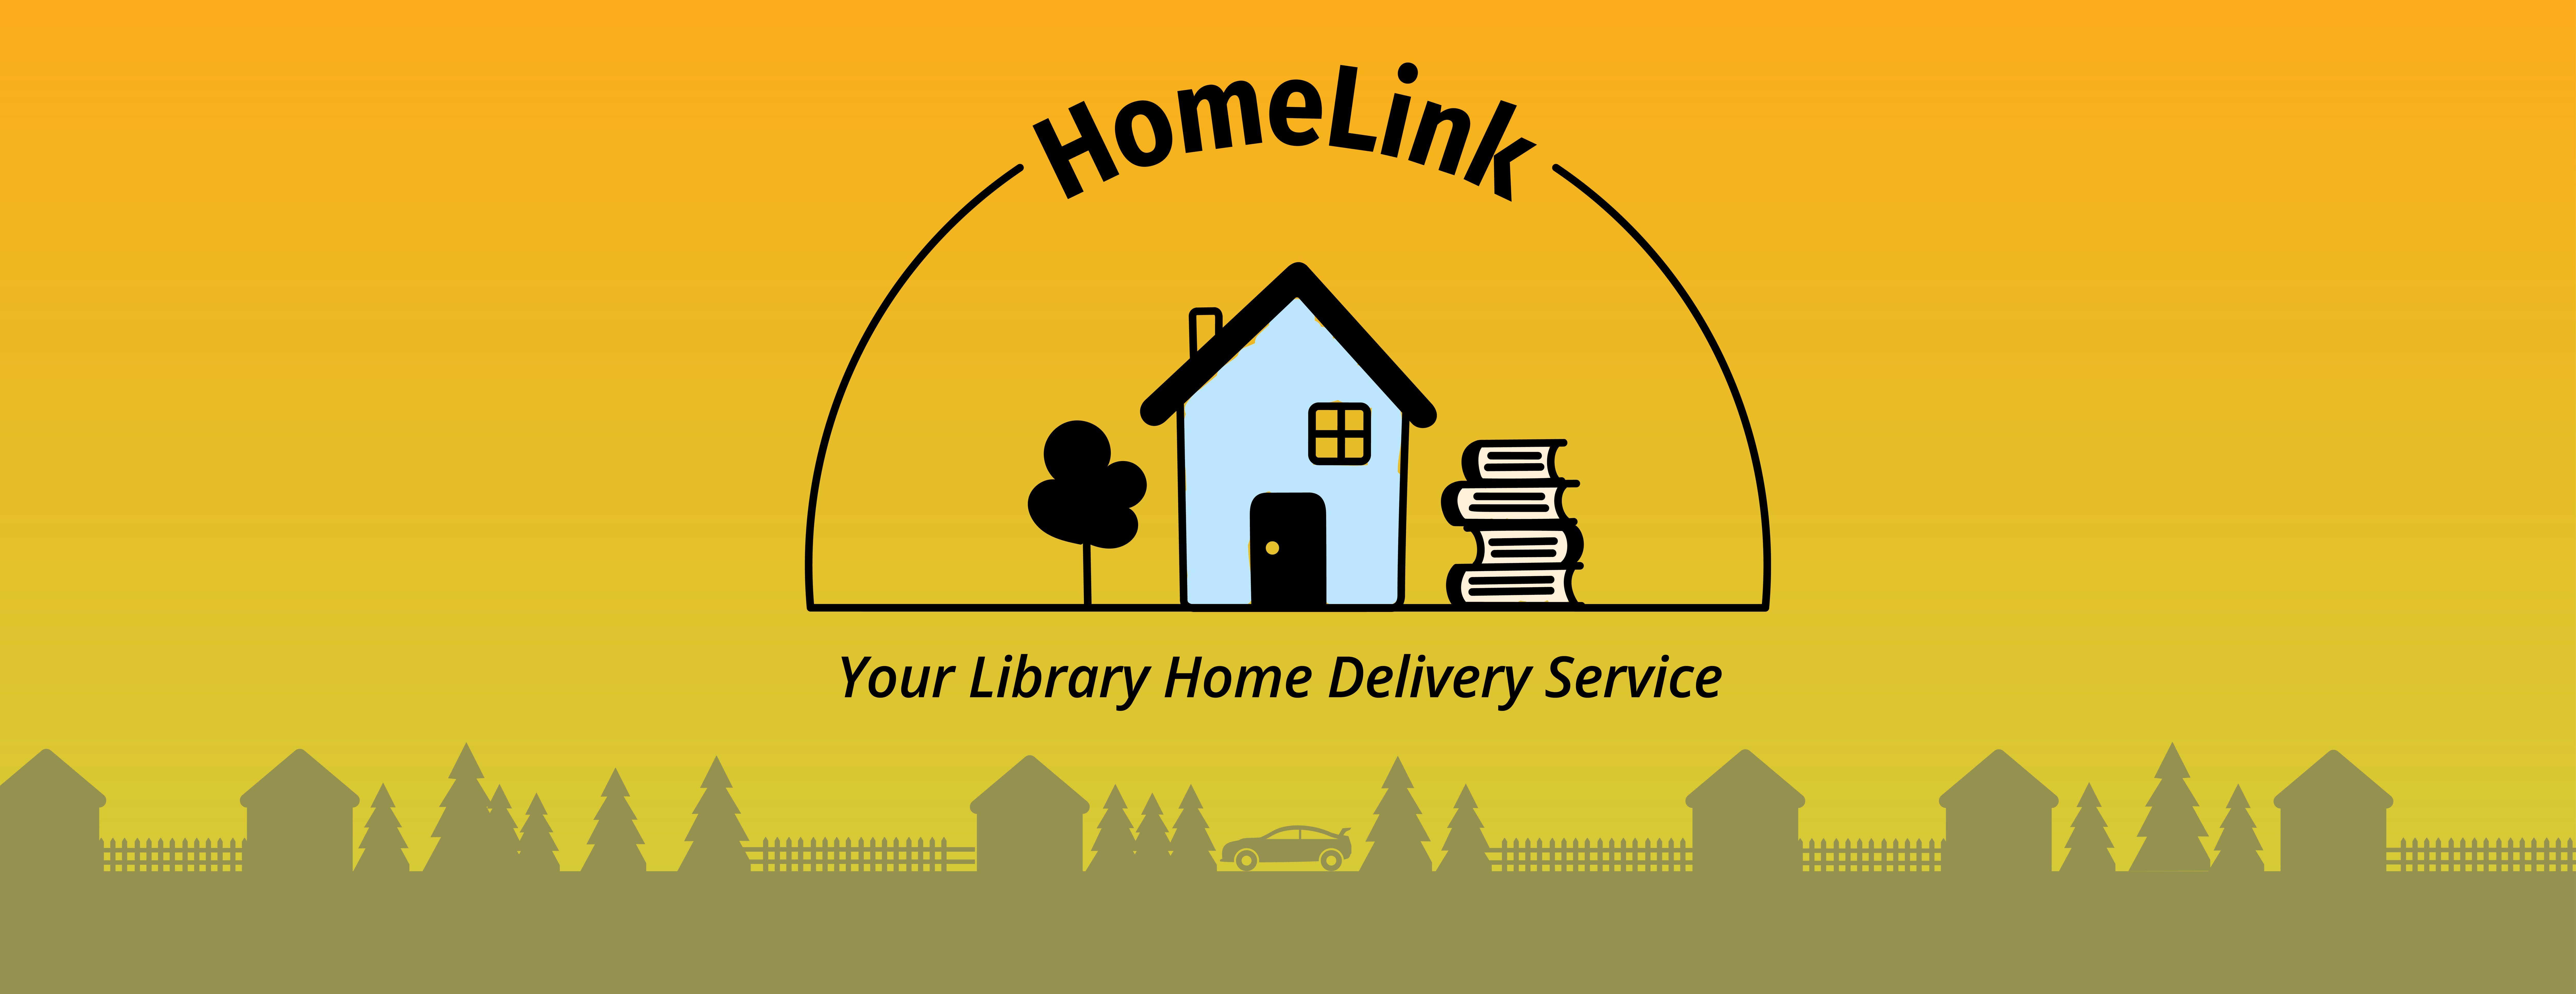 Homelink logo on an orange and yellow background with the silhouette of a neighbourhood below.